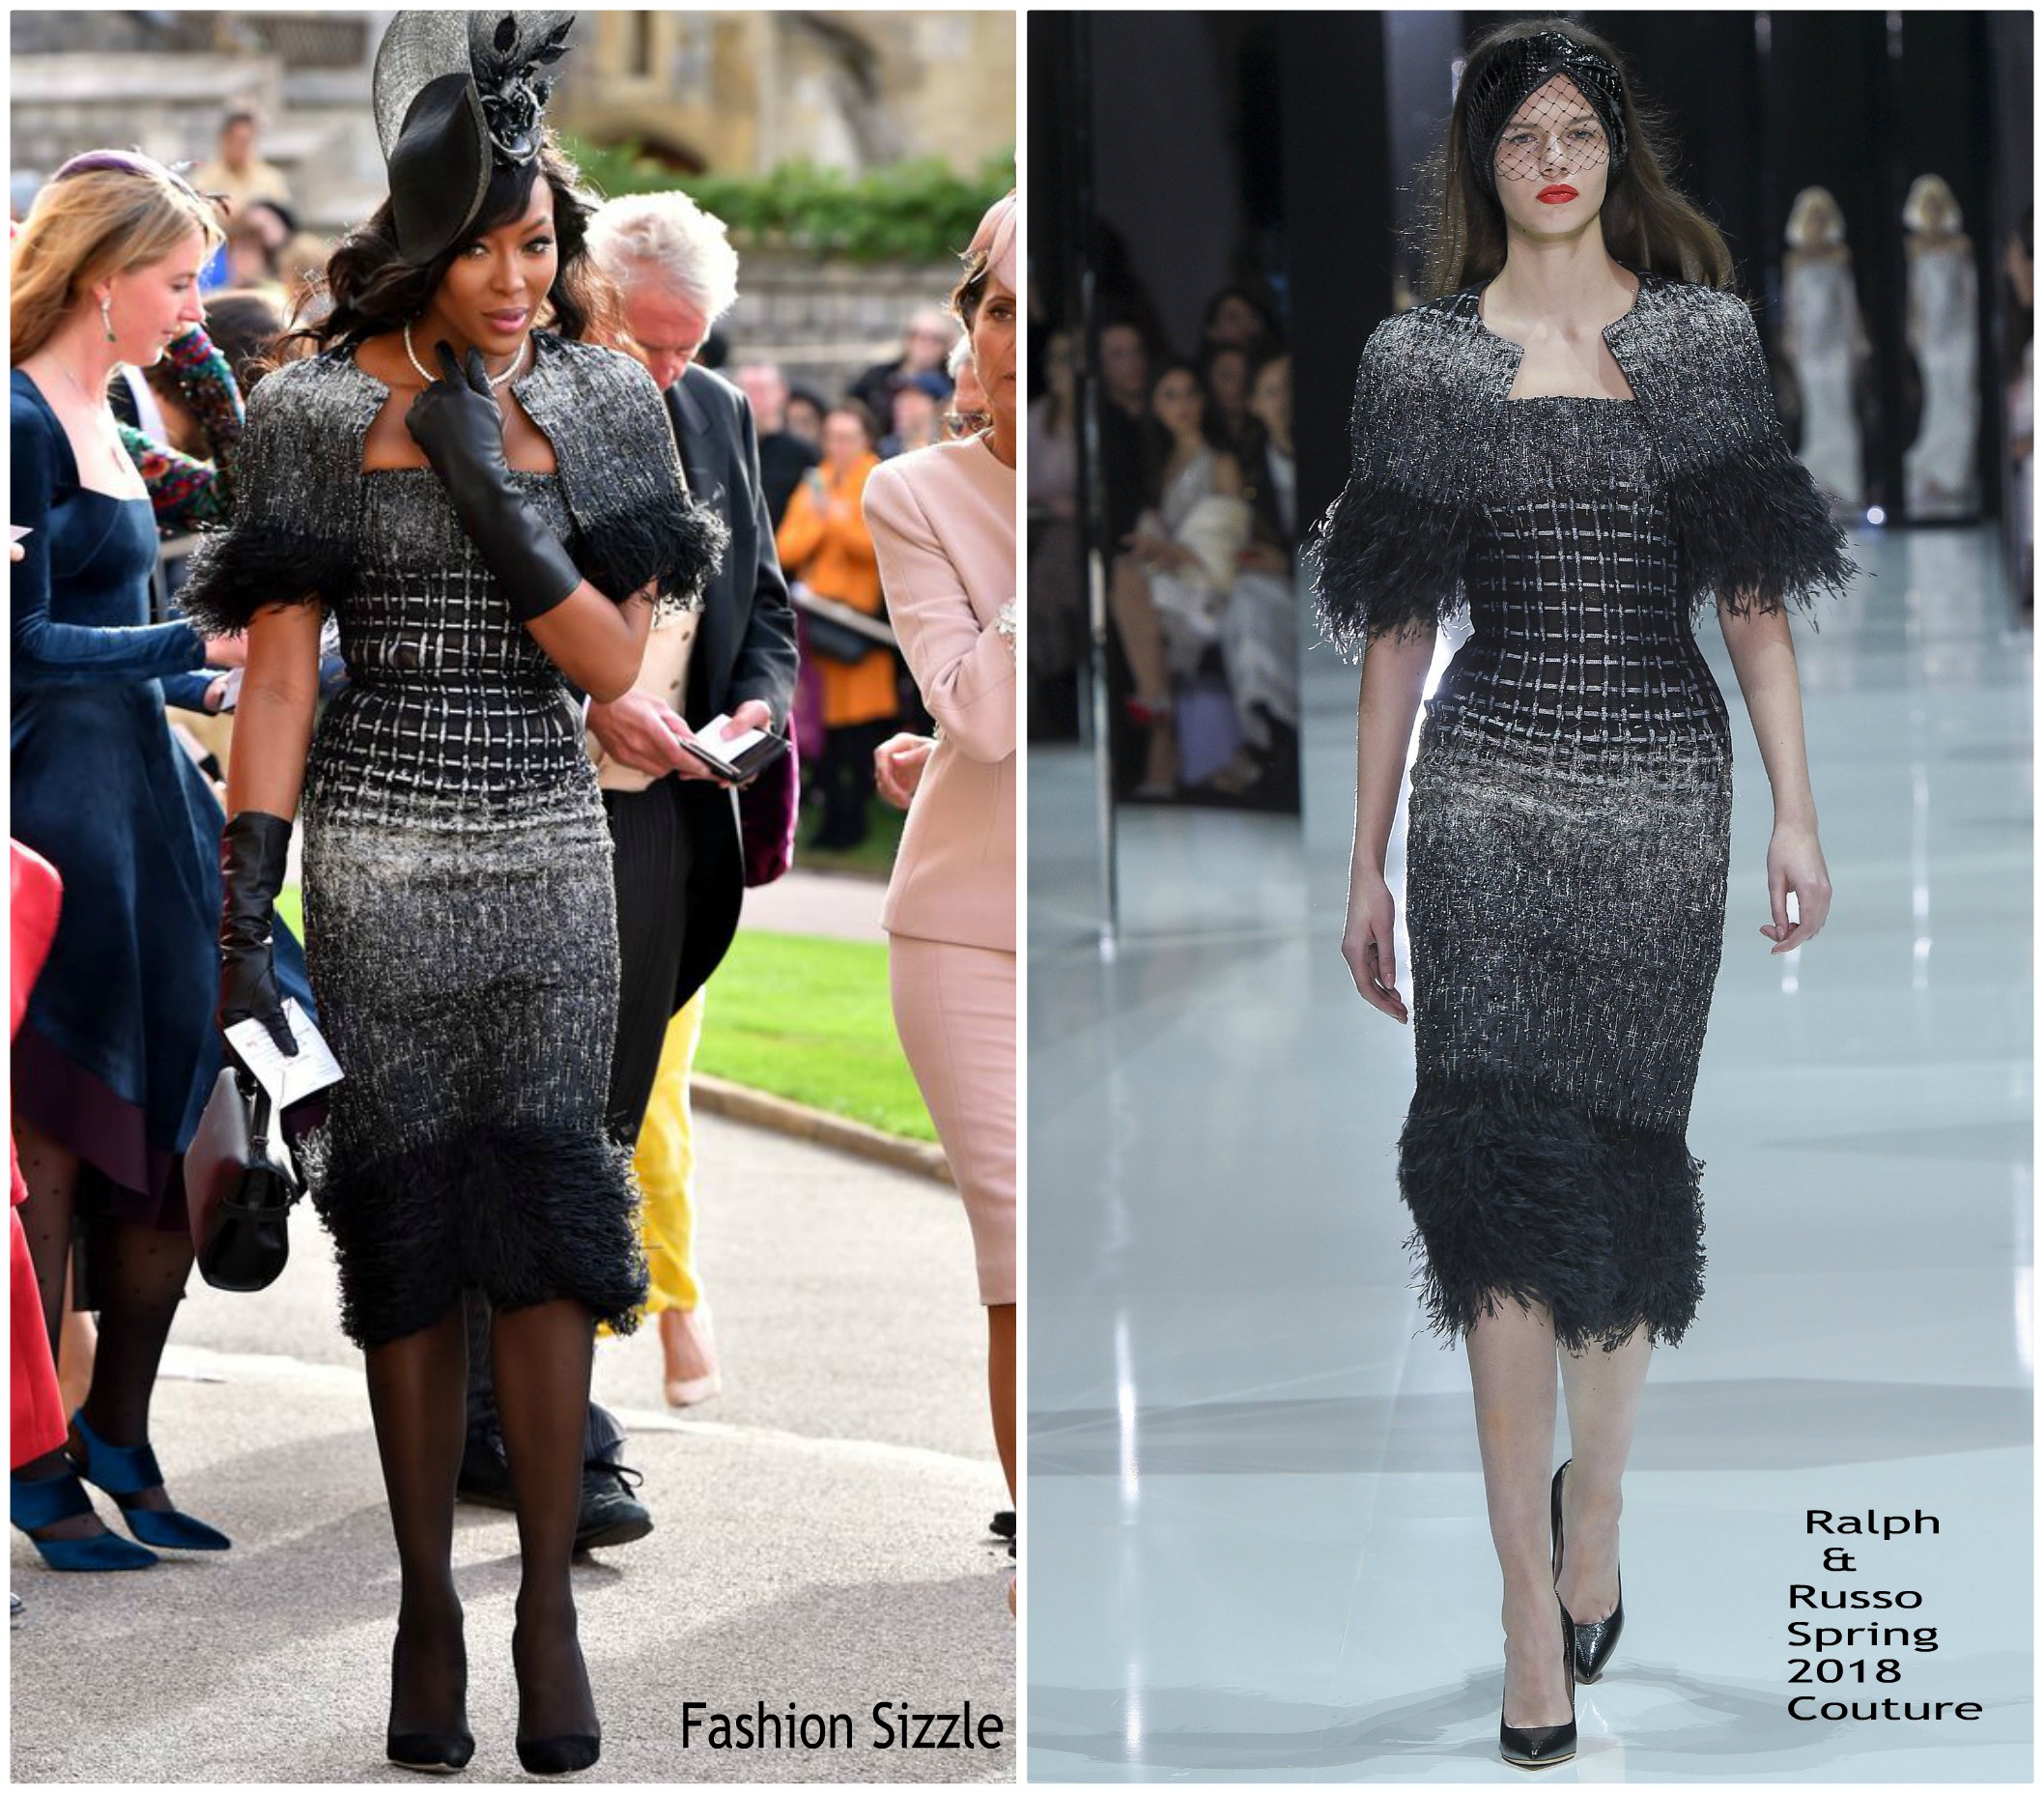 Naomi Campbell In Ralph & Russo Couture  @ Princess Eugenie Of York’s Wedding